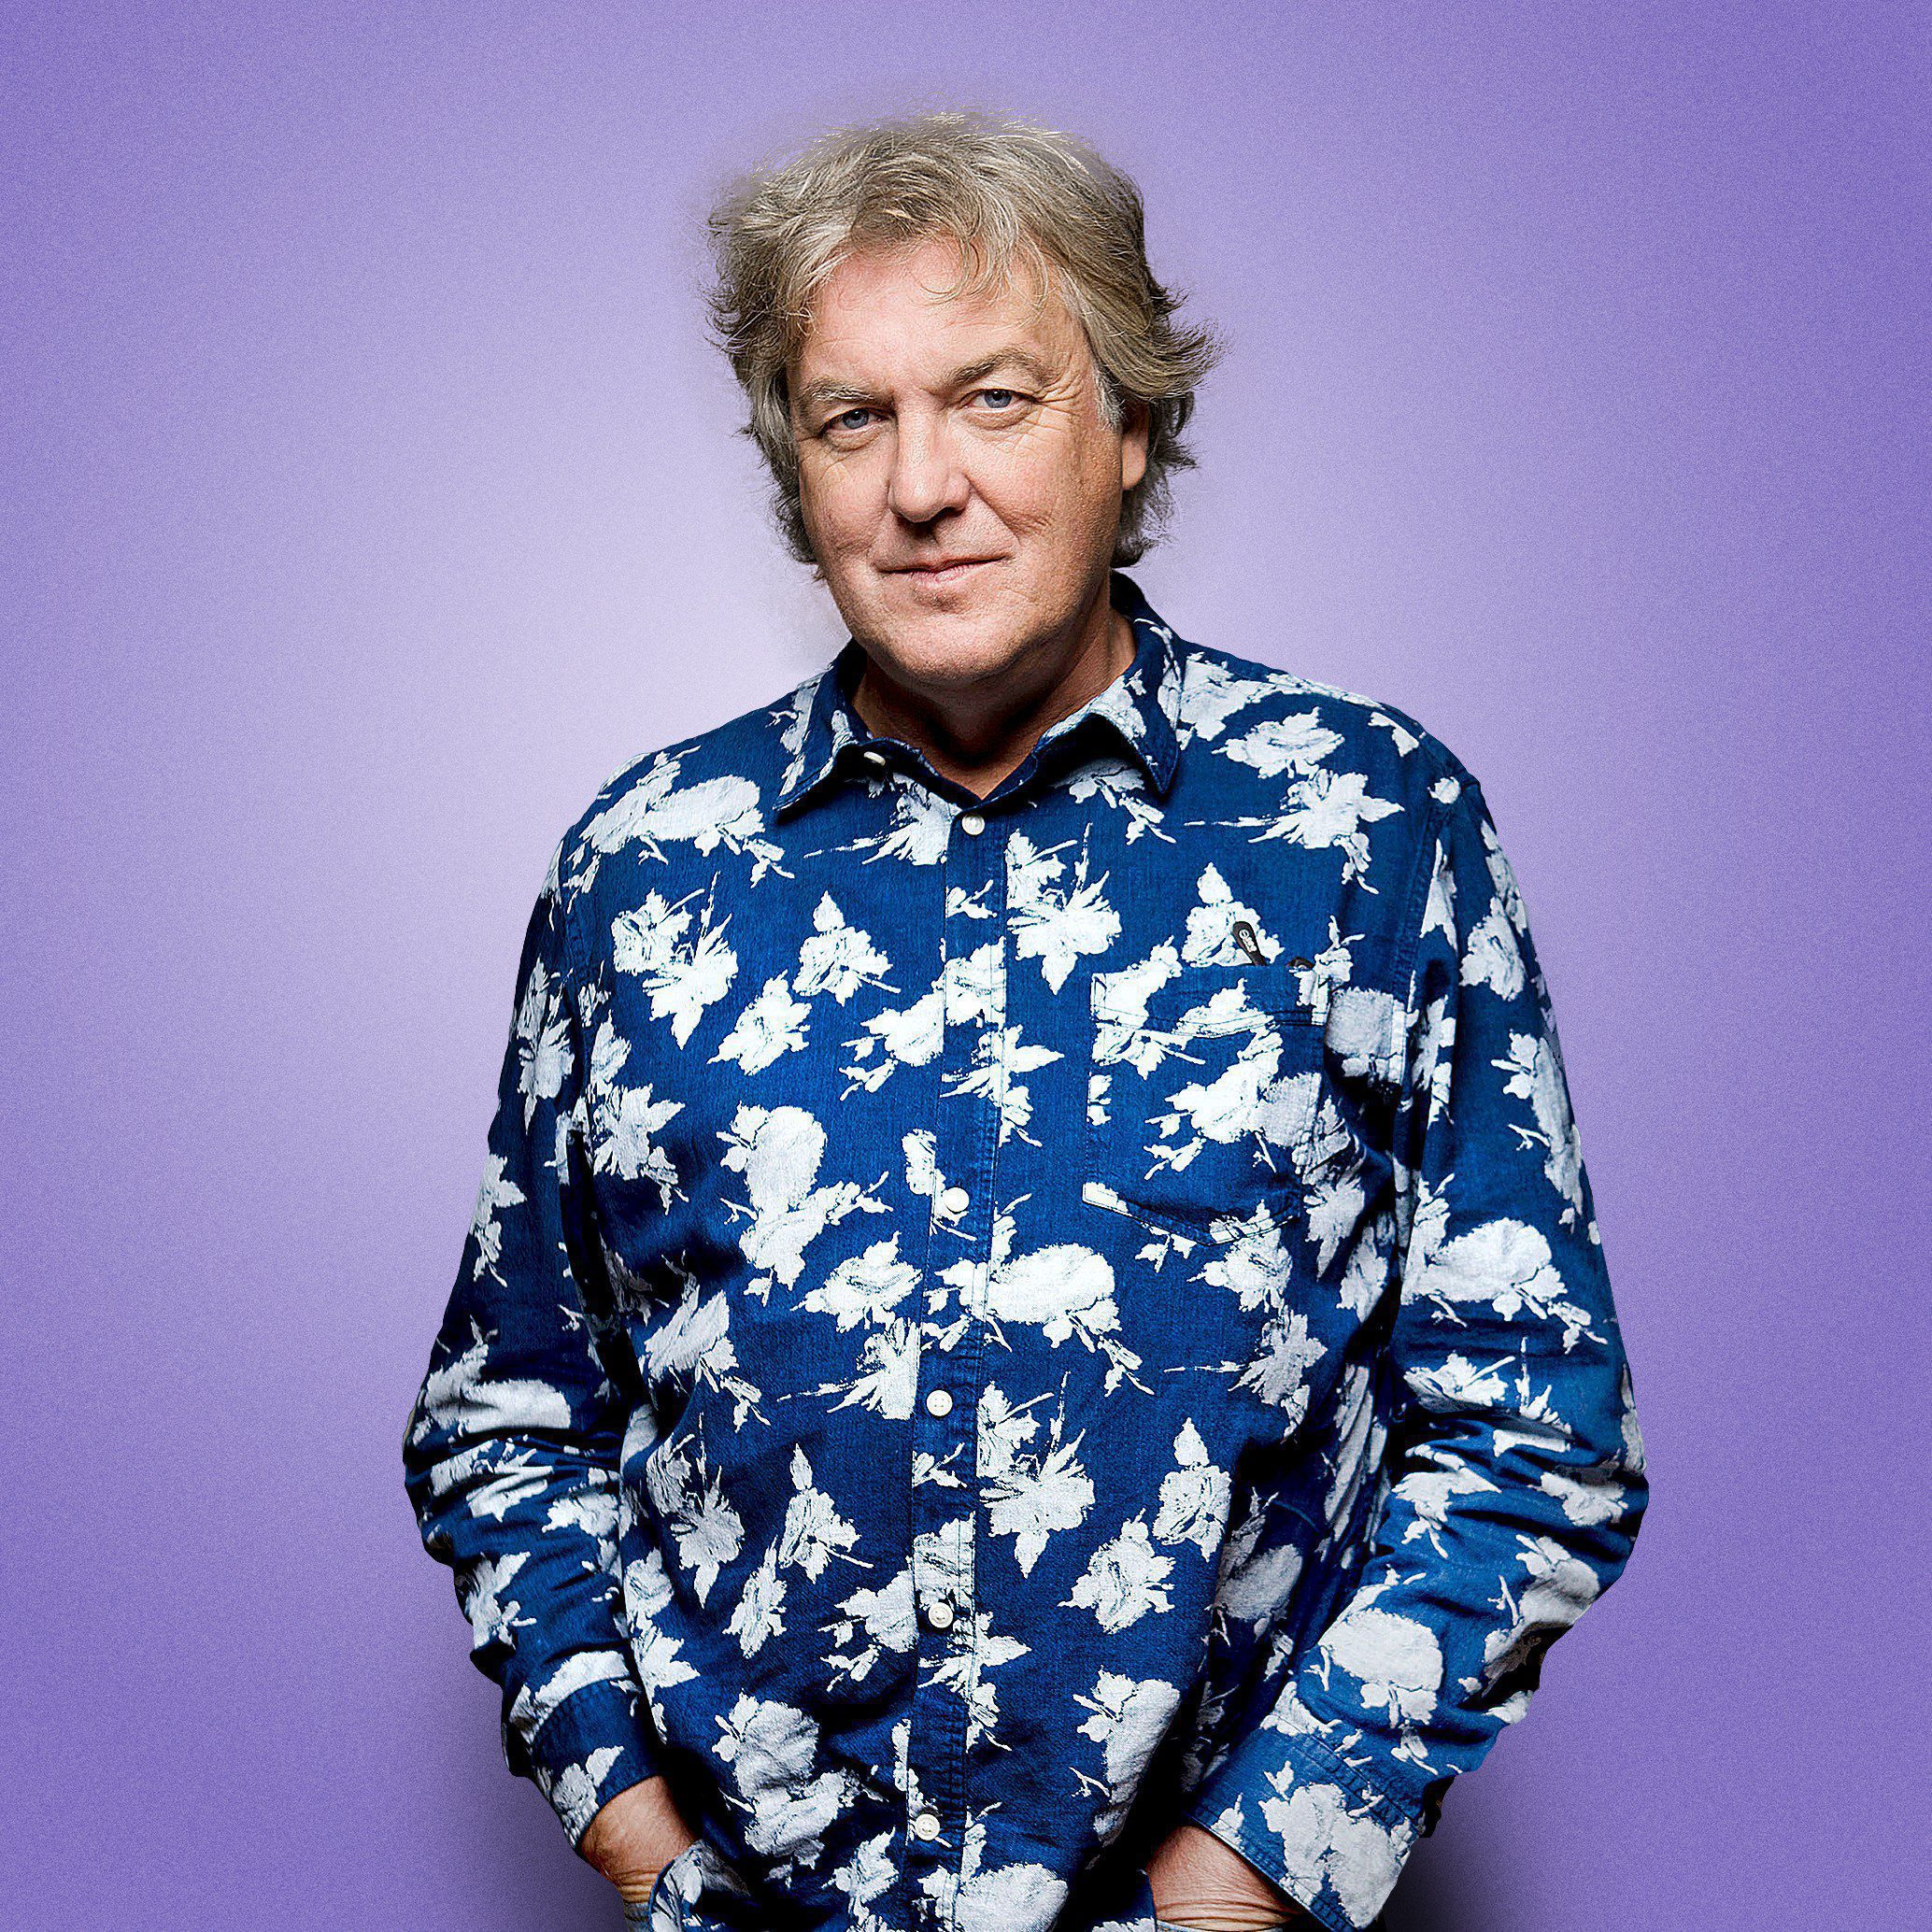 James May bio: age, wife, net worth, Top Gear, latest updates